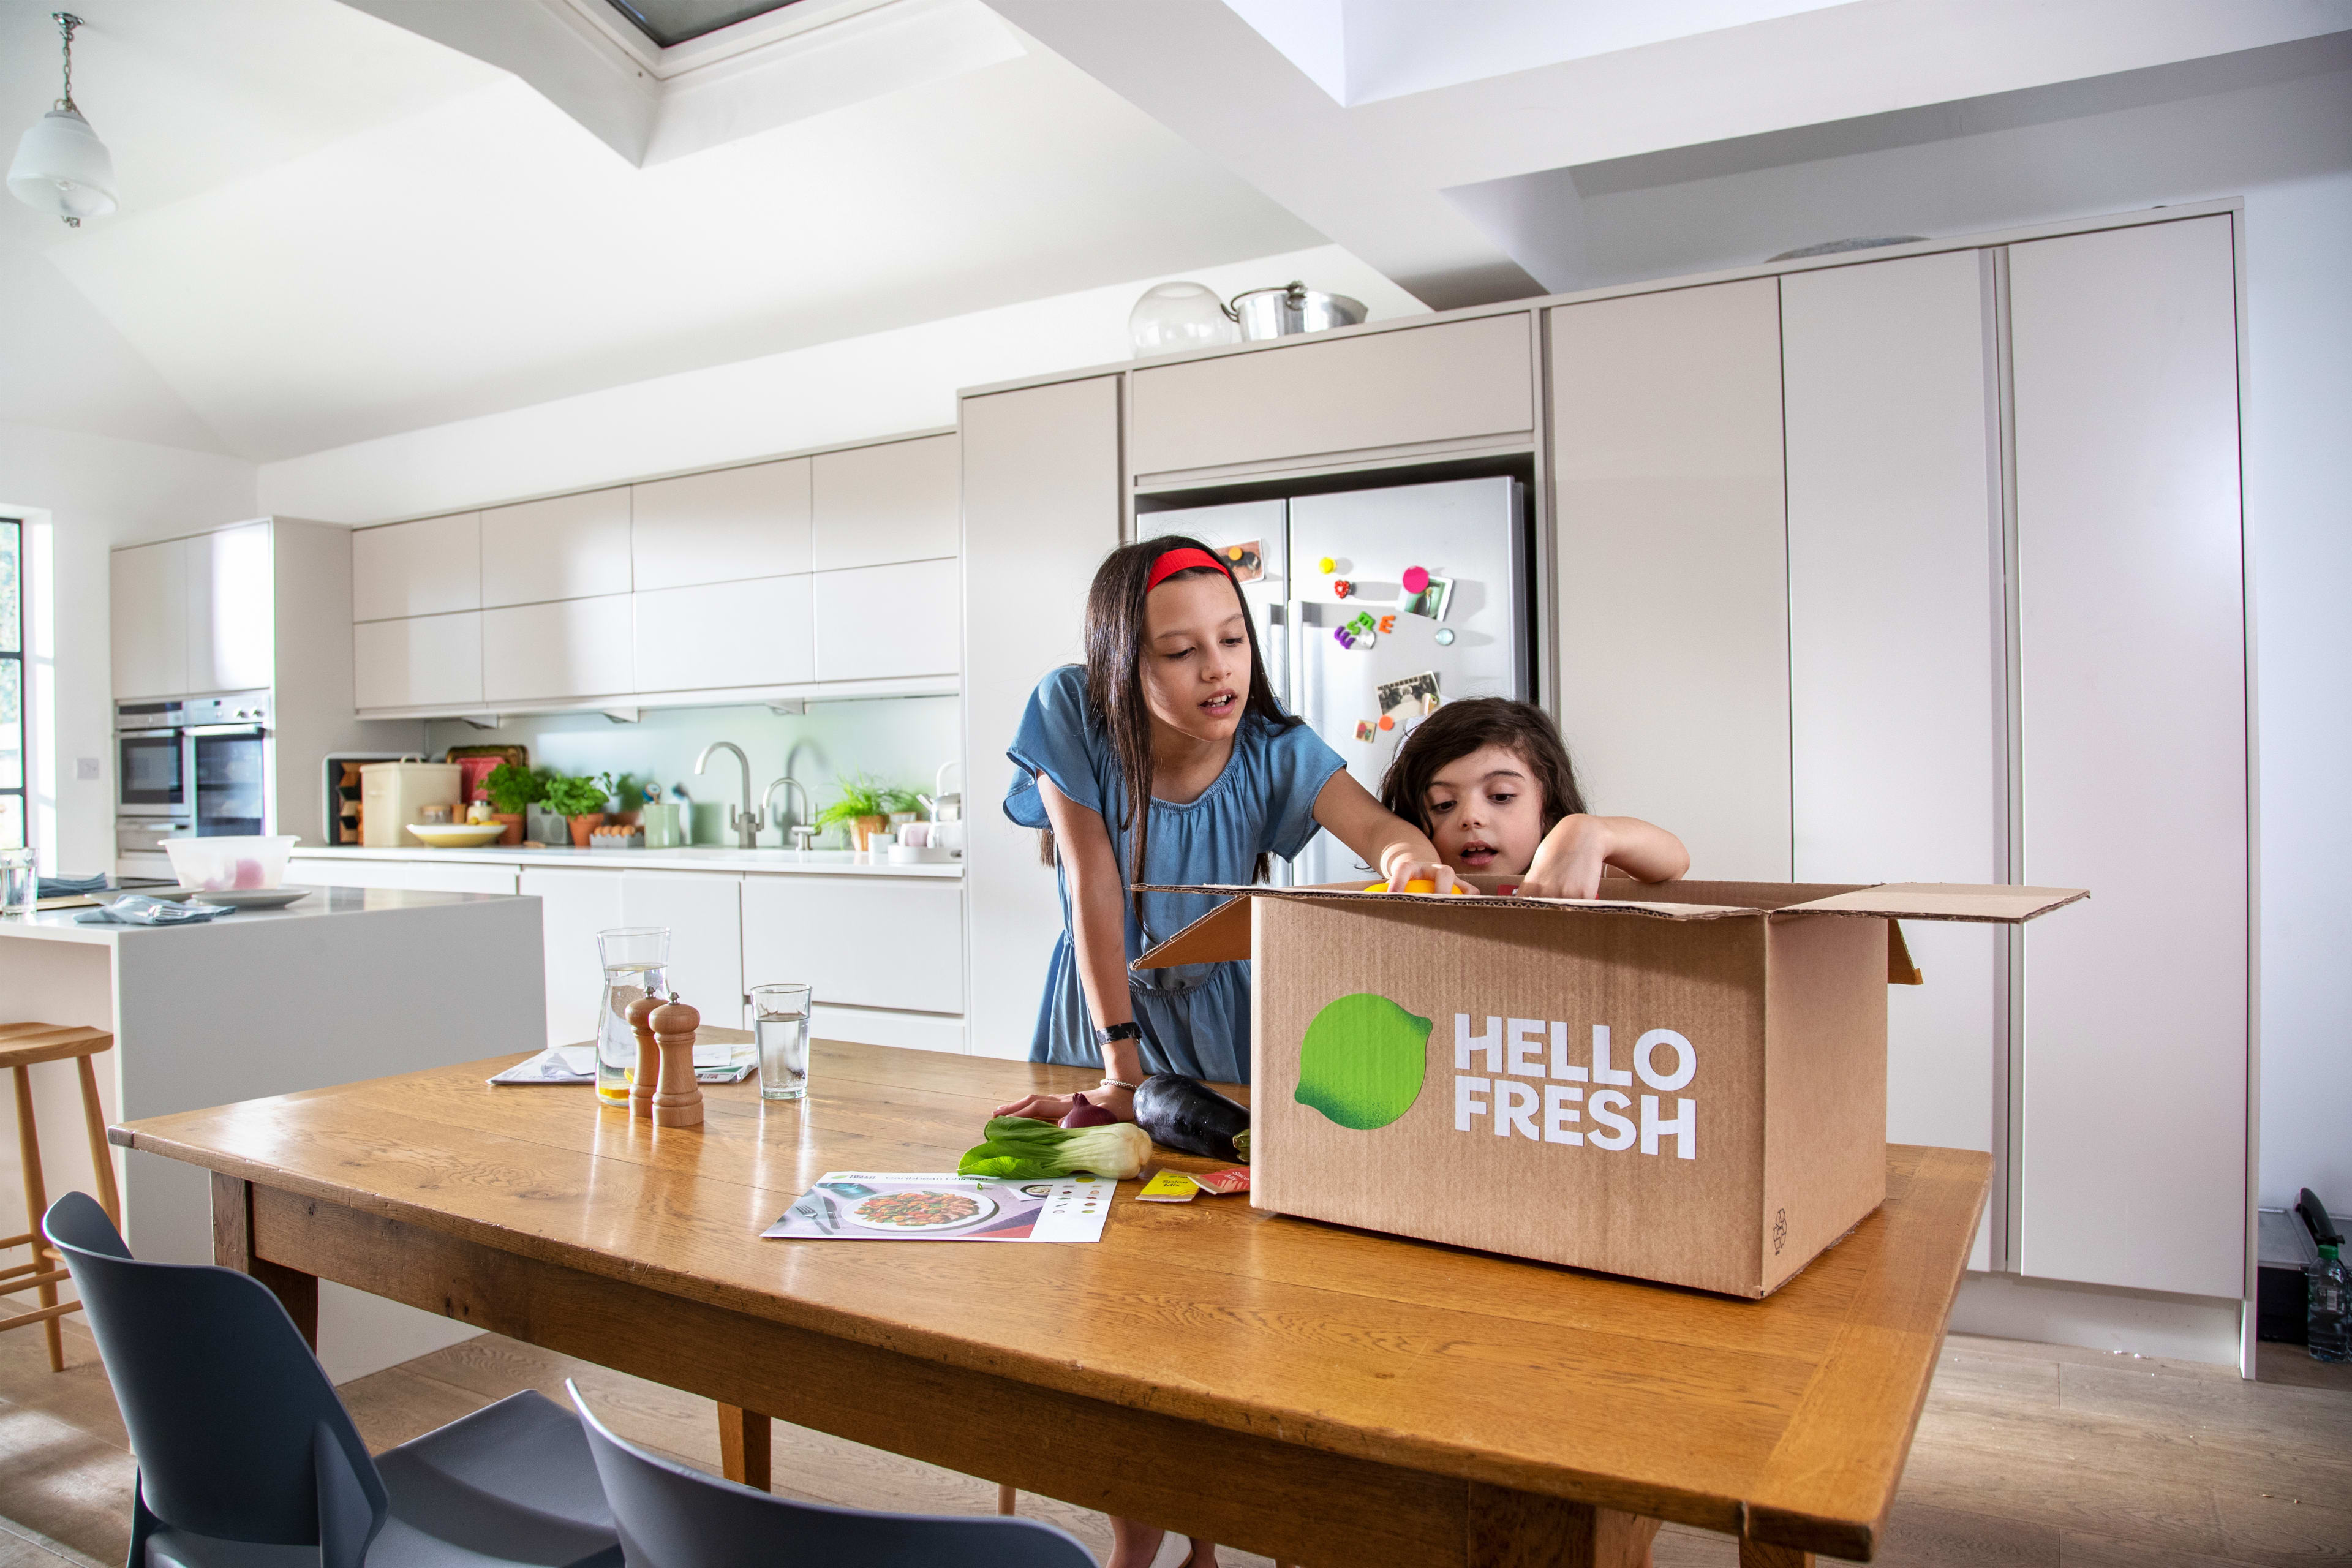 <h2>Did you have a problem with your HelloFresh delivery?</h2>